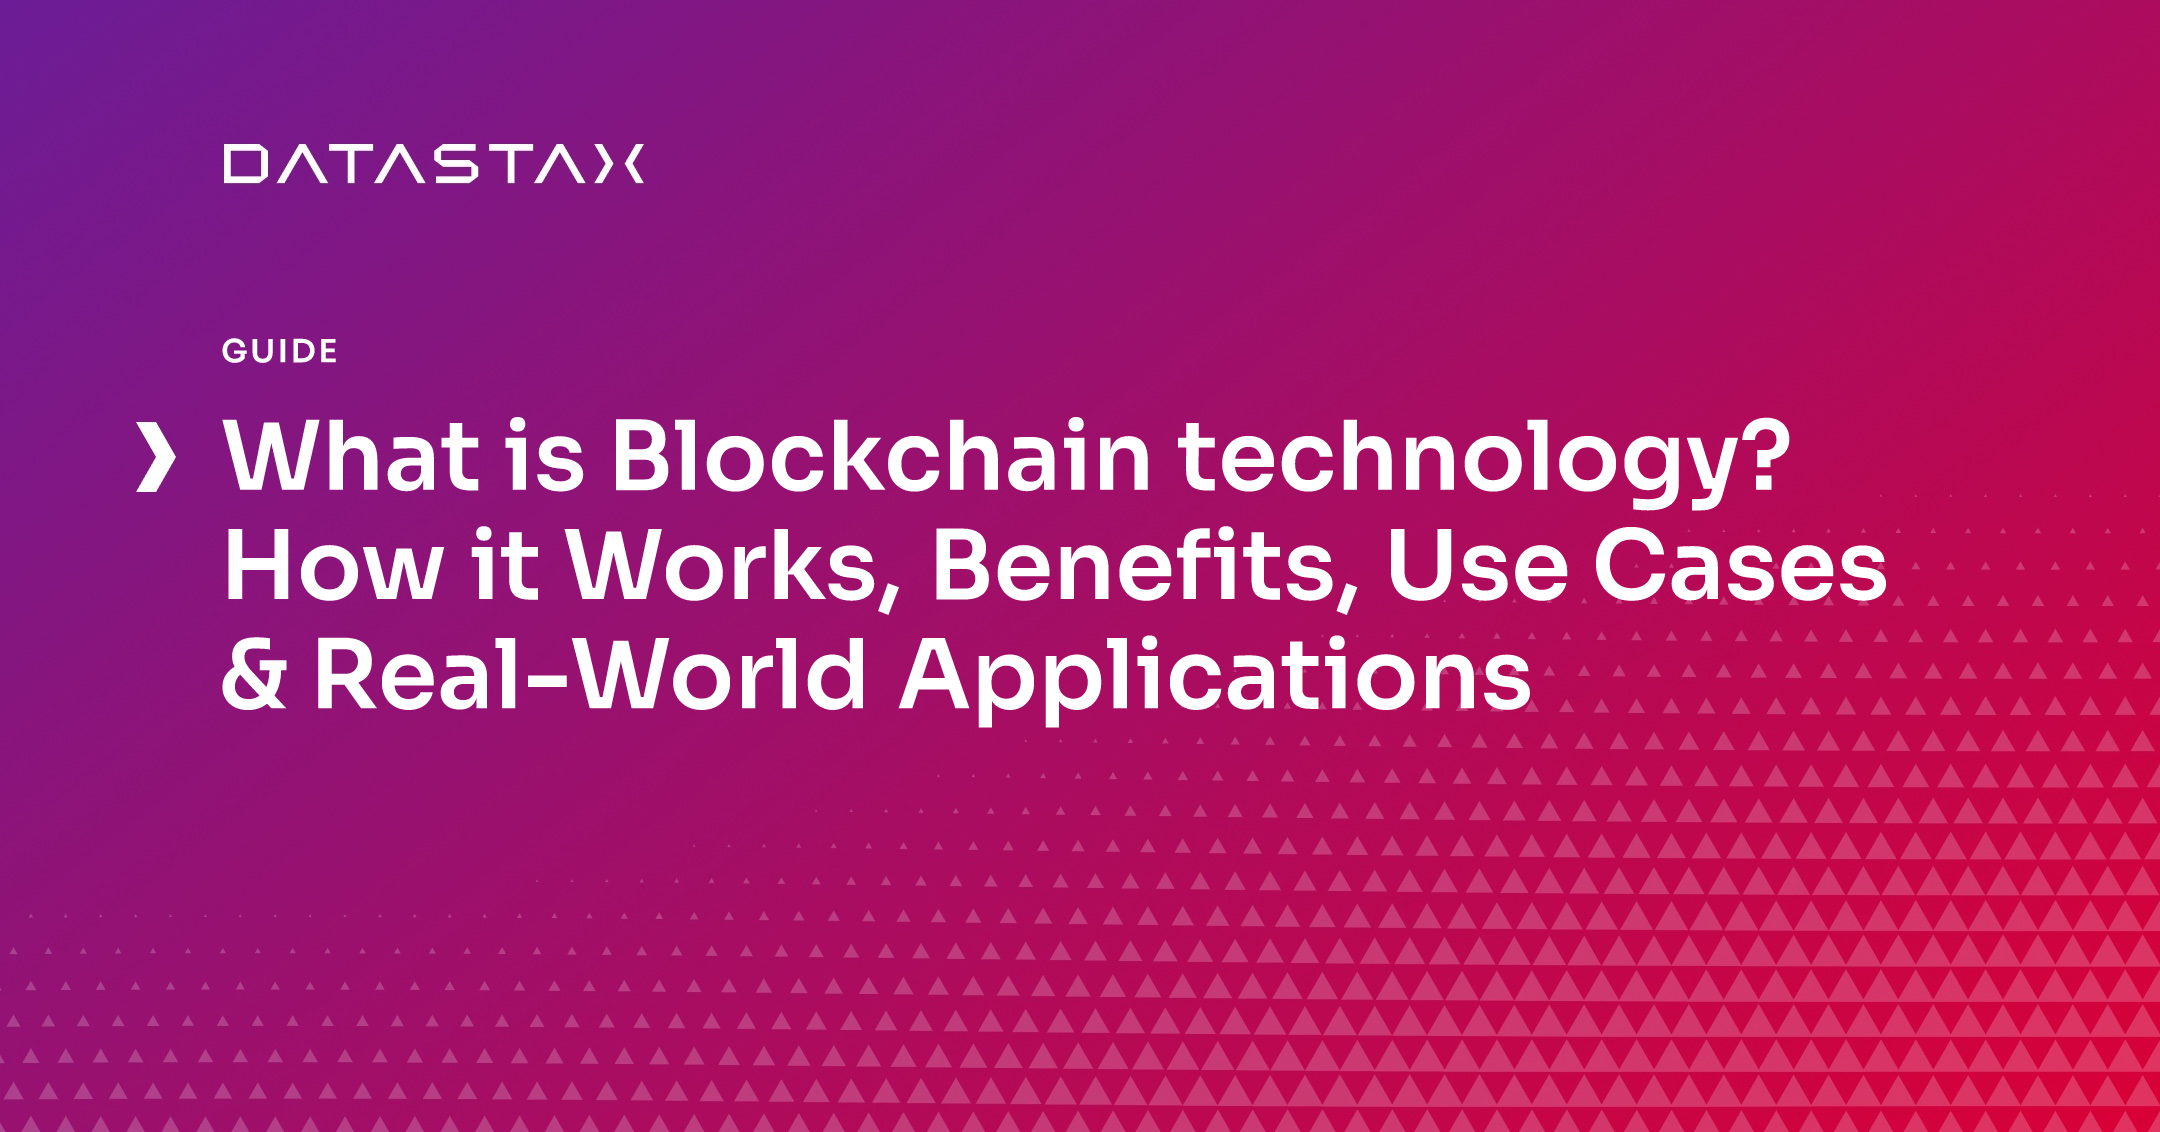 What is Blockchain technology? How it Works, Benefits, Use Cases & Real-World Applications